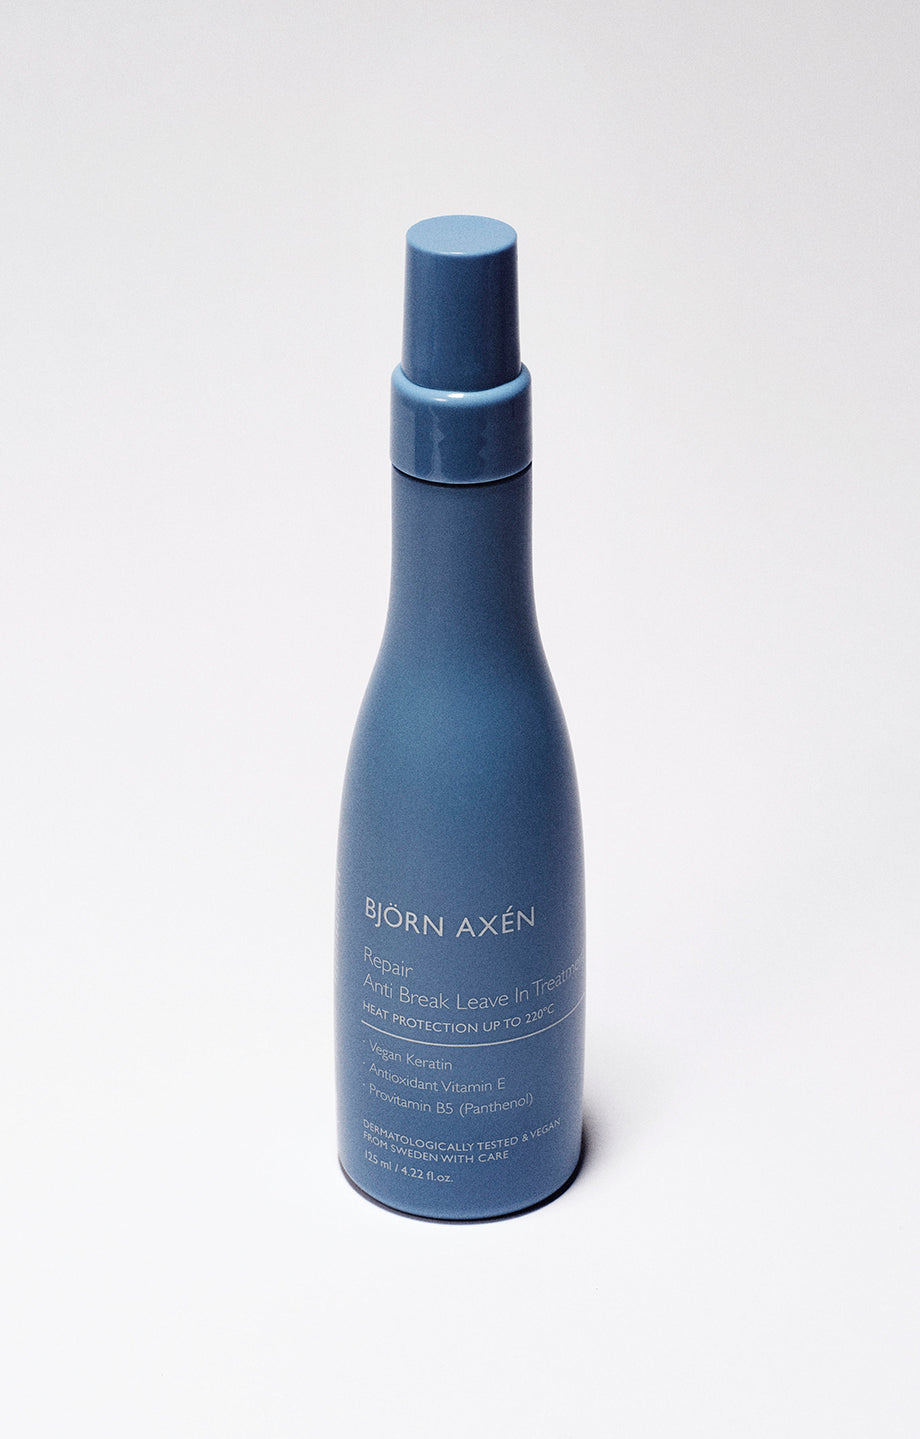 A leave-in treatment that strengthens the hair while providing heat protection